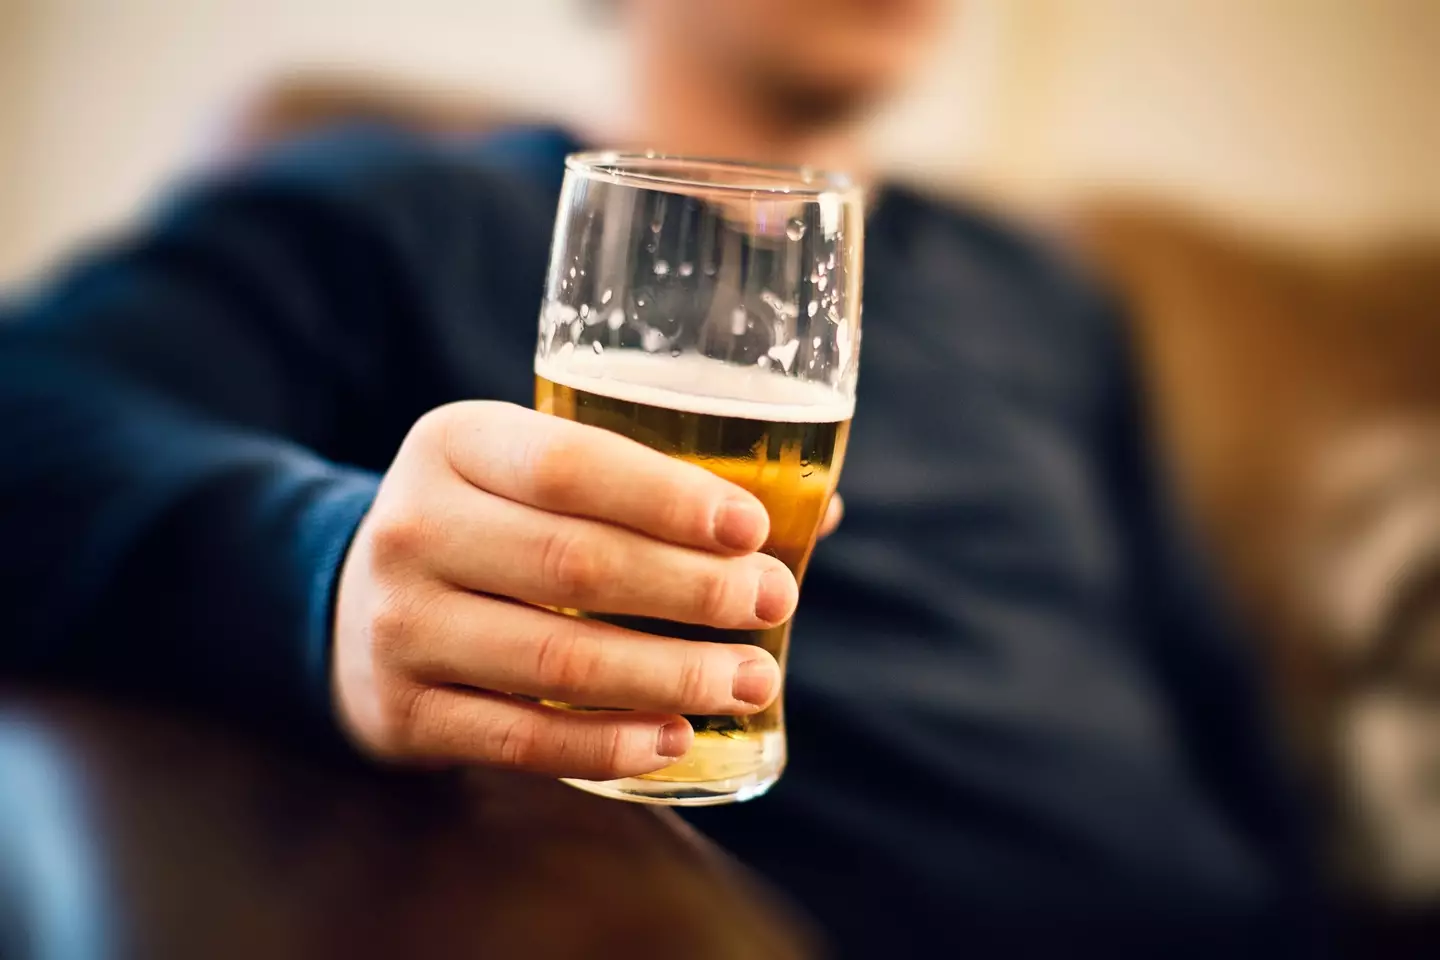 There are common excuses high-functioning alcoholics give for their habit. (Getty stock image)